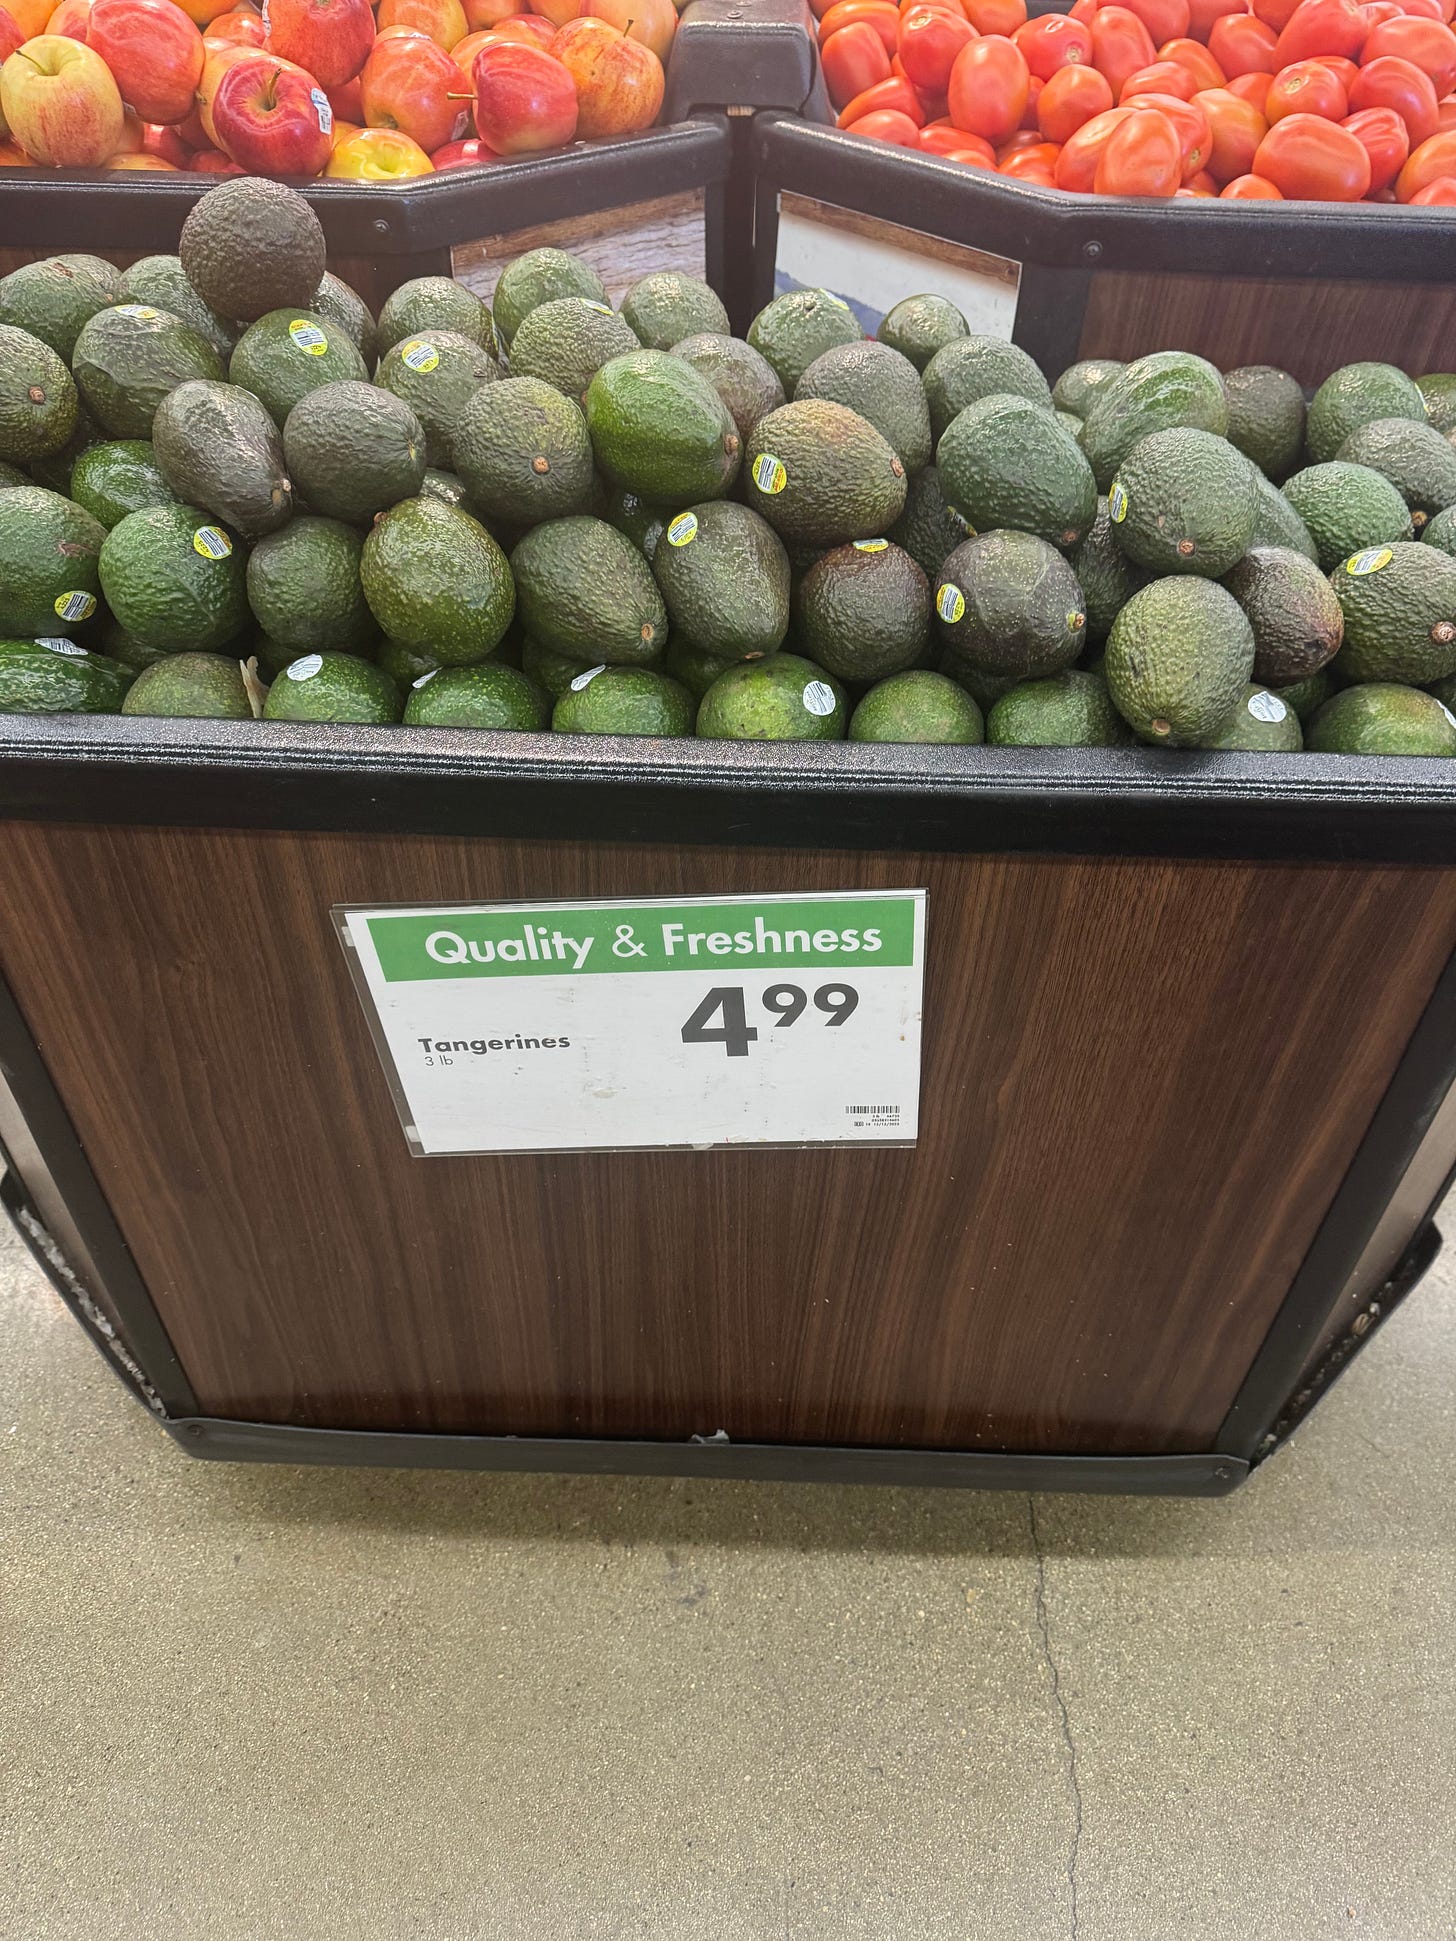 A display of avocados in a grocery store but the sign says "tangerines" 